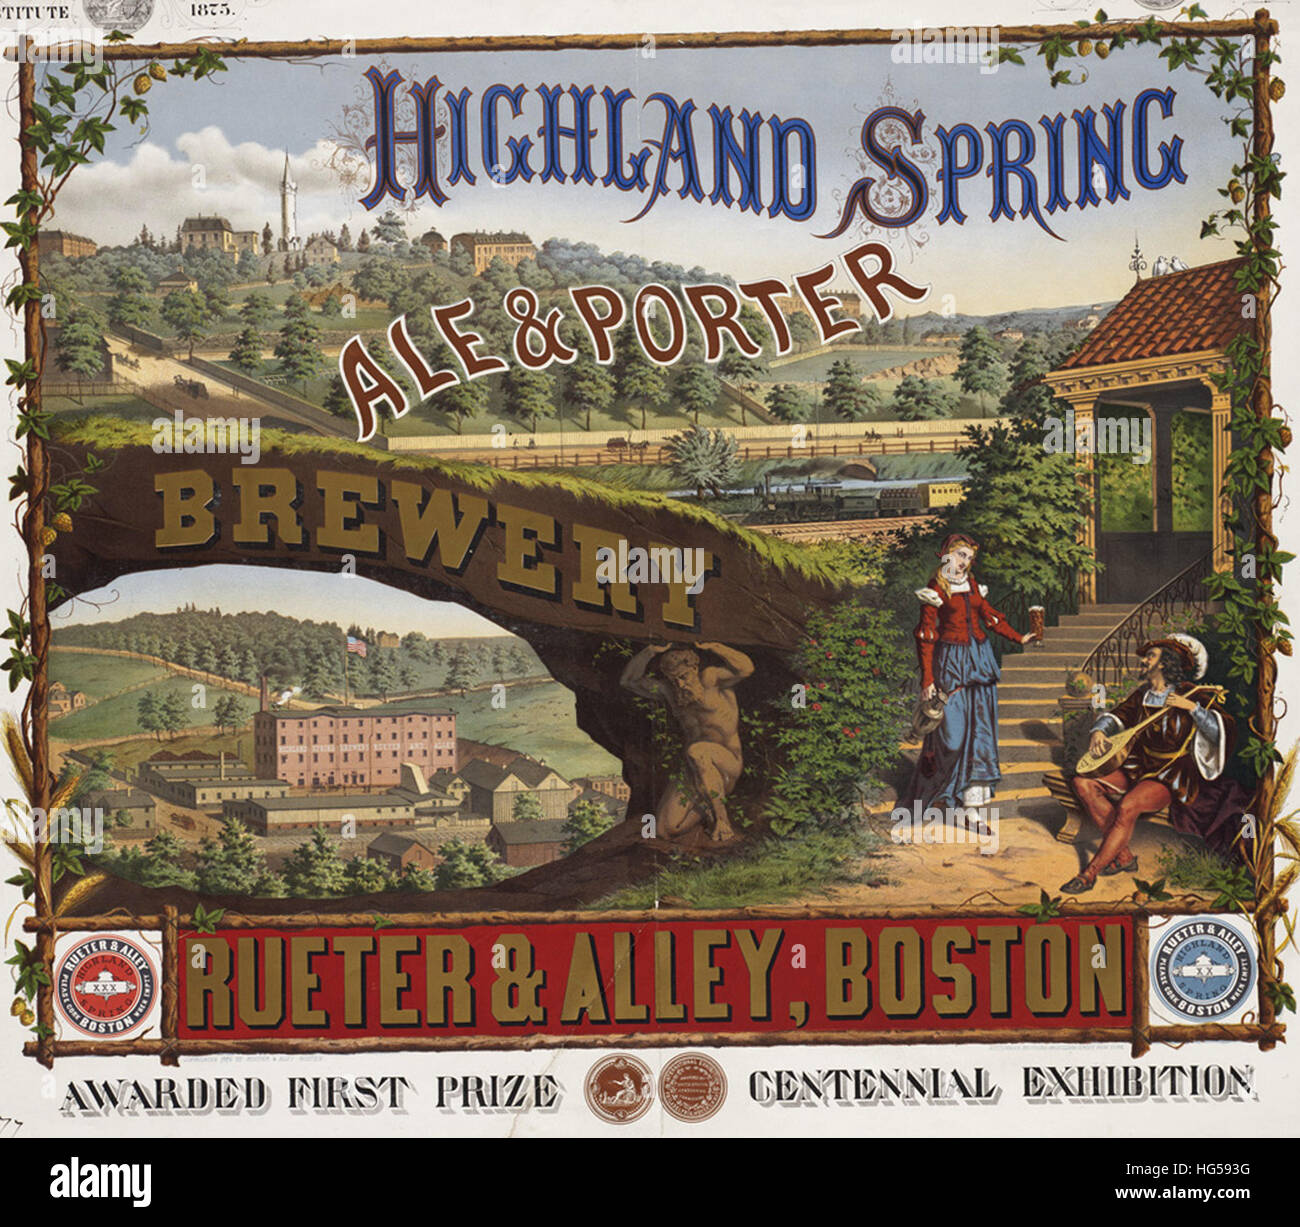 Boston Brewery Affiches - Highland Spring Brewery ale & porter. Rueter & Alley, Boston Banque D'Images